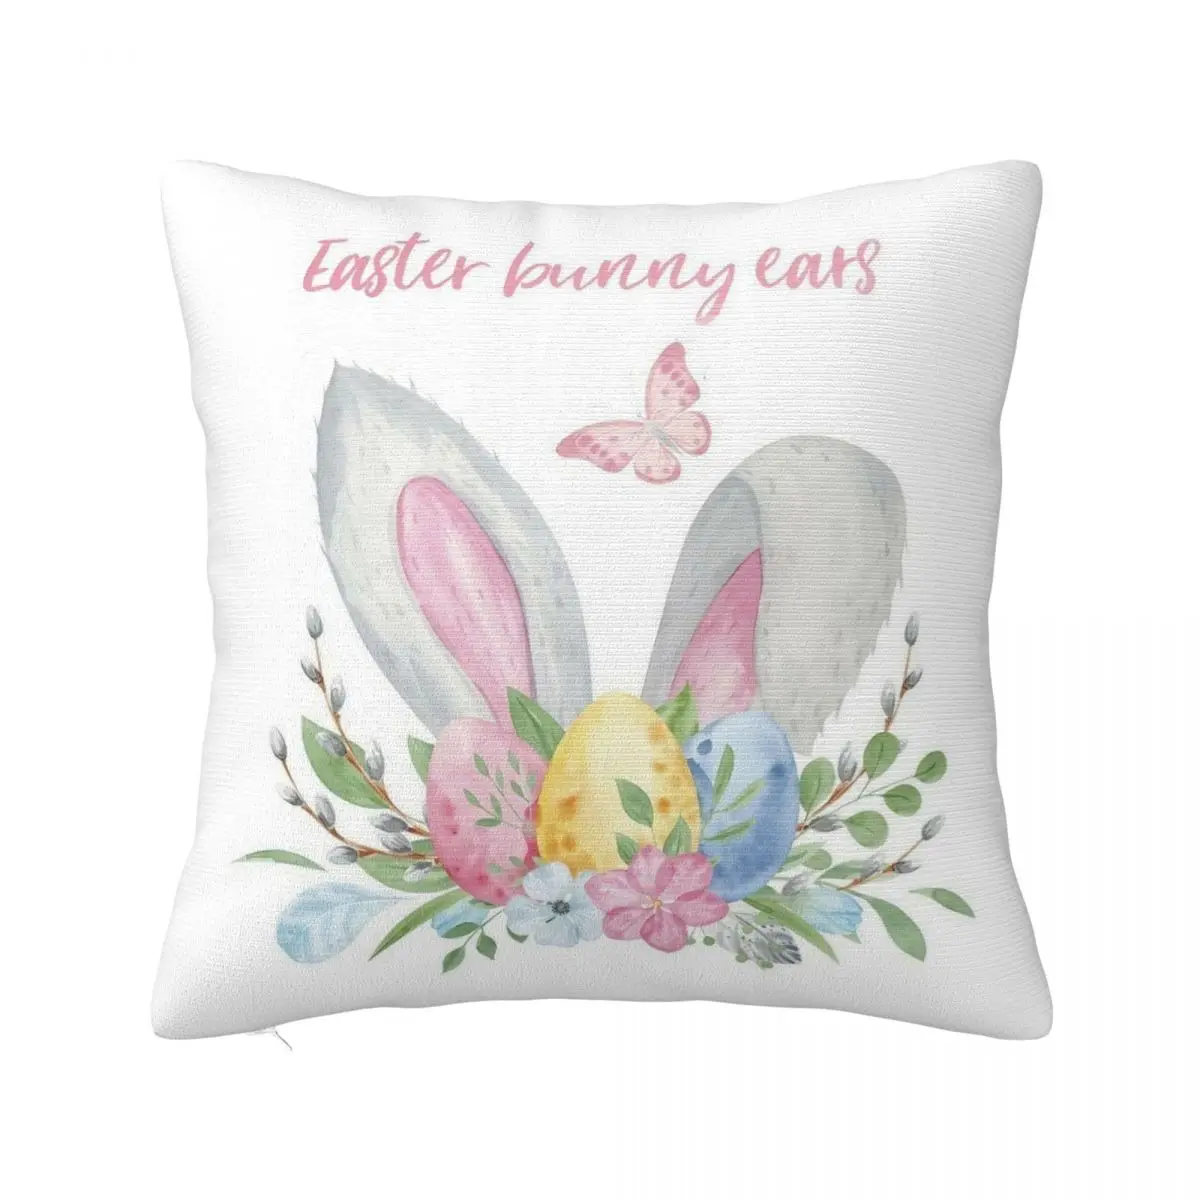 

Bunny Easter Eggs Flowers Pillowcase Printing Polyester Cushion Cover Decorations Pillow Case Cover Home Zipper 45X45cm